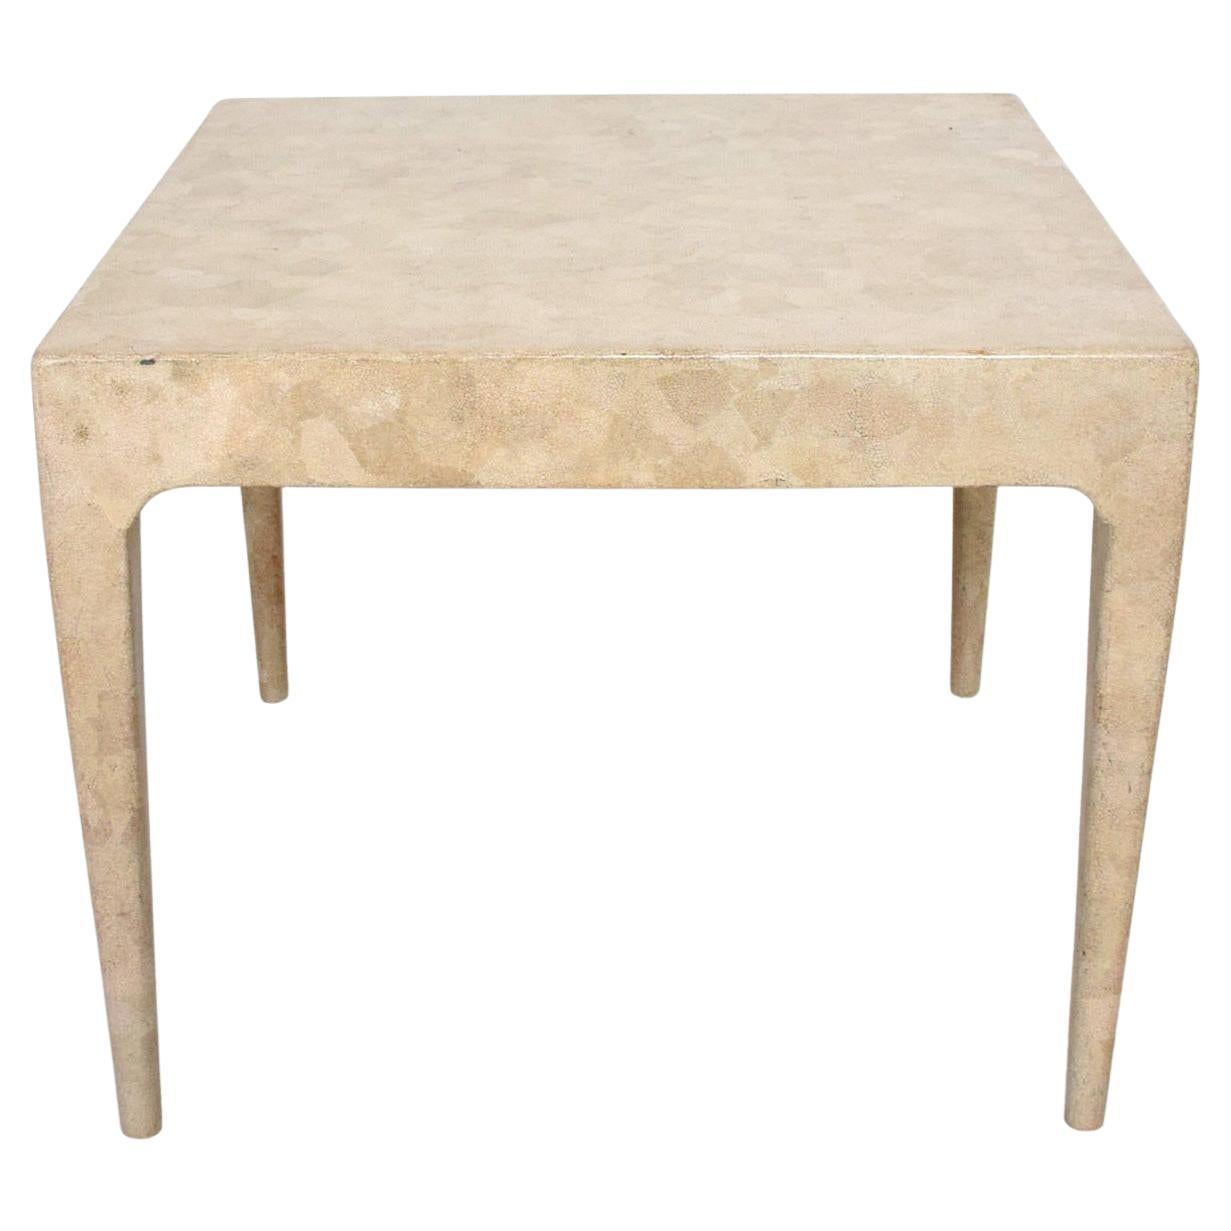 1970s Style Aldo Tura Exquisite Side Table Tessellated Stone  For Sale